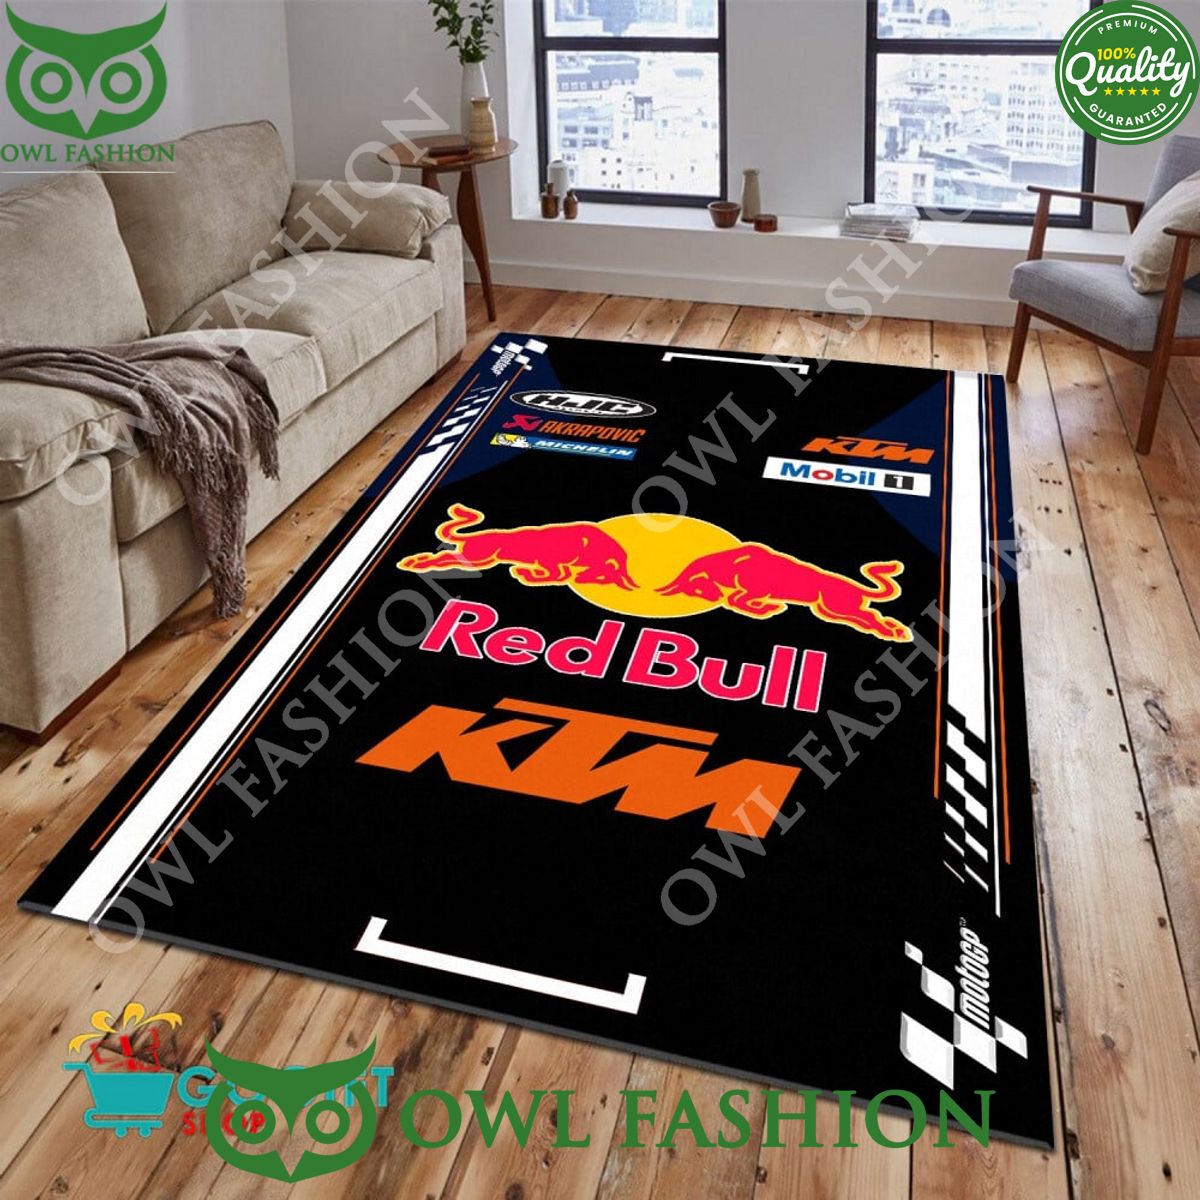 Red Bull KTM Factory Racing Carpet Rug Hey! Your profile picture is awesome